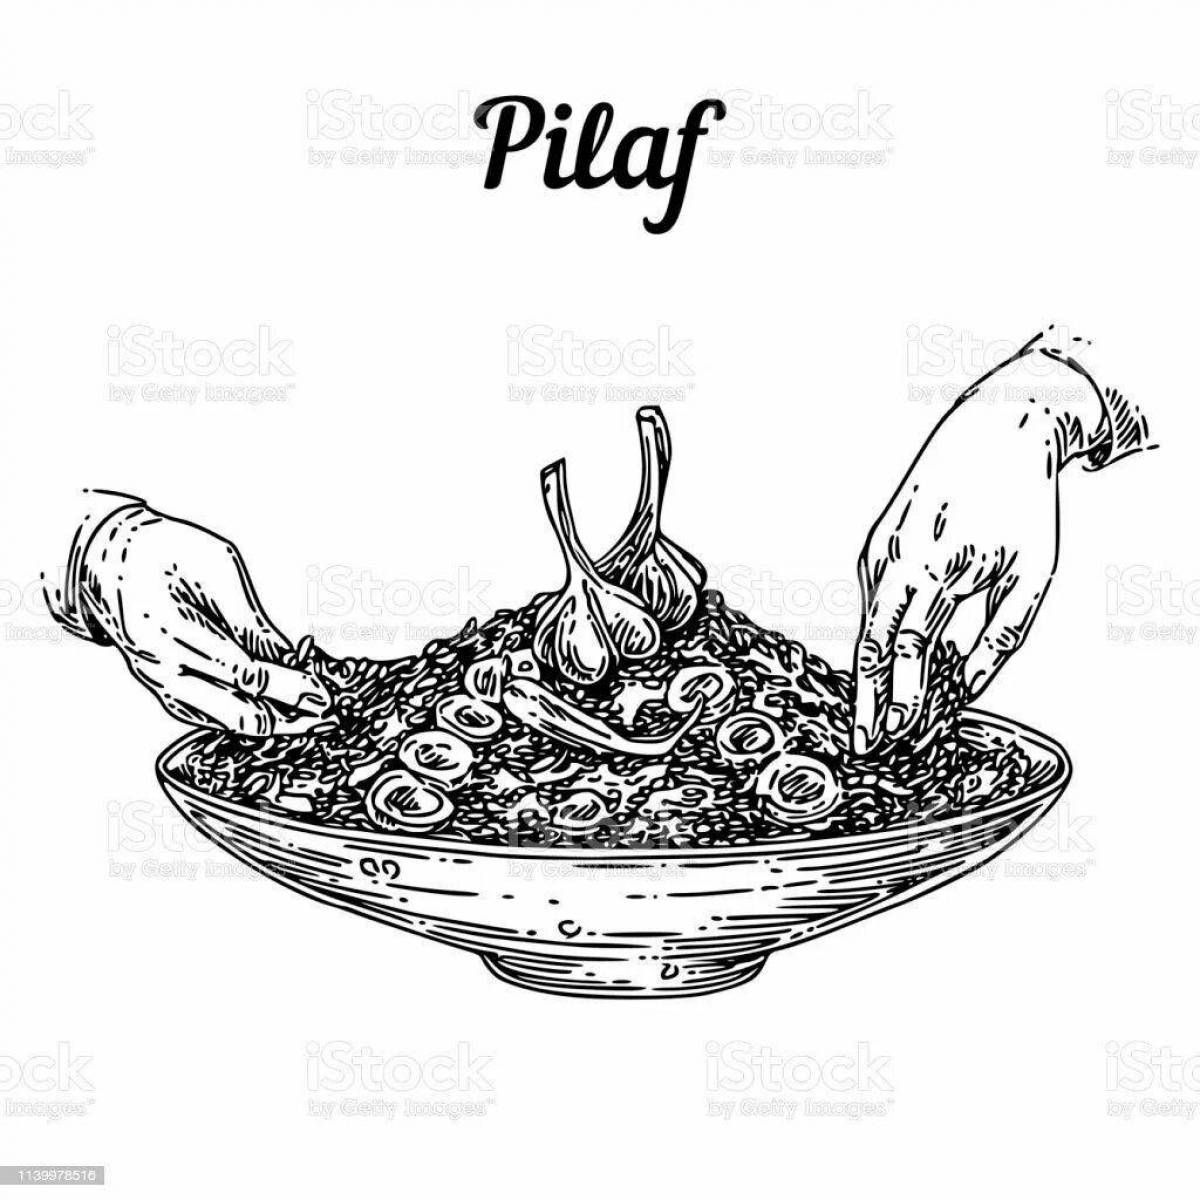 Coloring page stylish pilaf